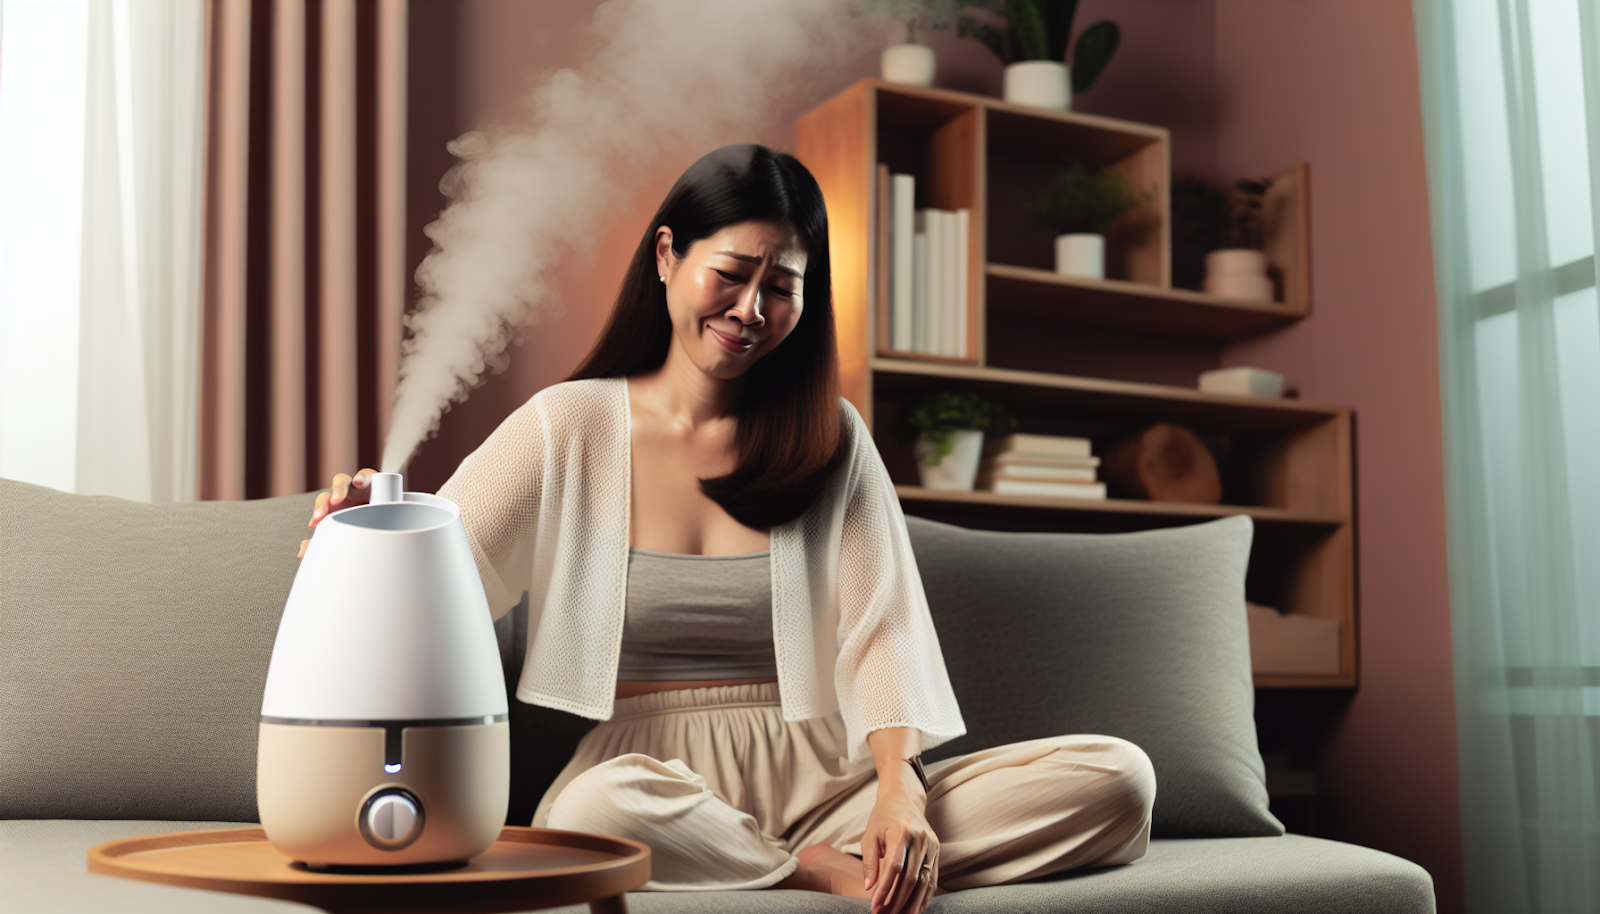 Photo of a person using a humidifier to relieve stuffy ears